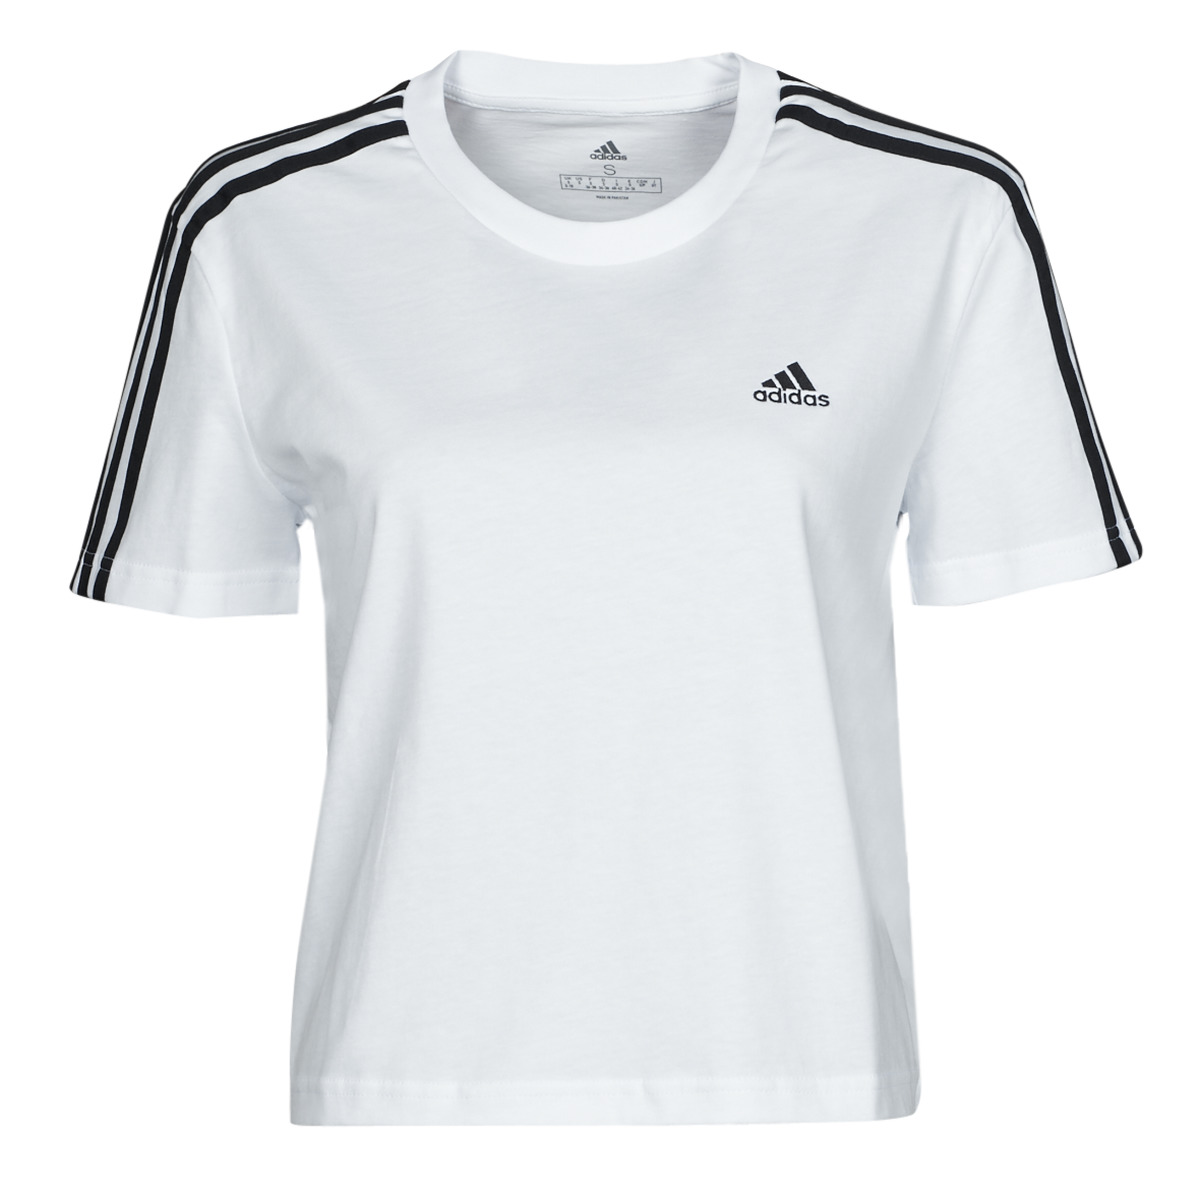 Clothing - adidas delivery t-shirts € Europe short-sleeved | 3S Performance 22,40 Fast W ! CRO Spartoo - T White Women